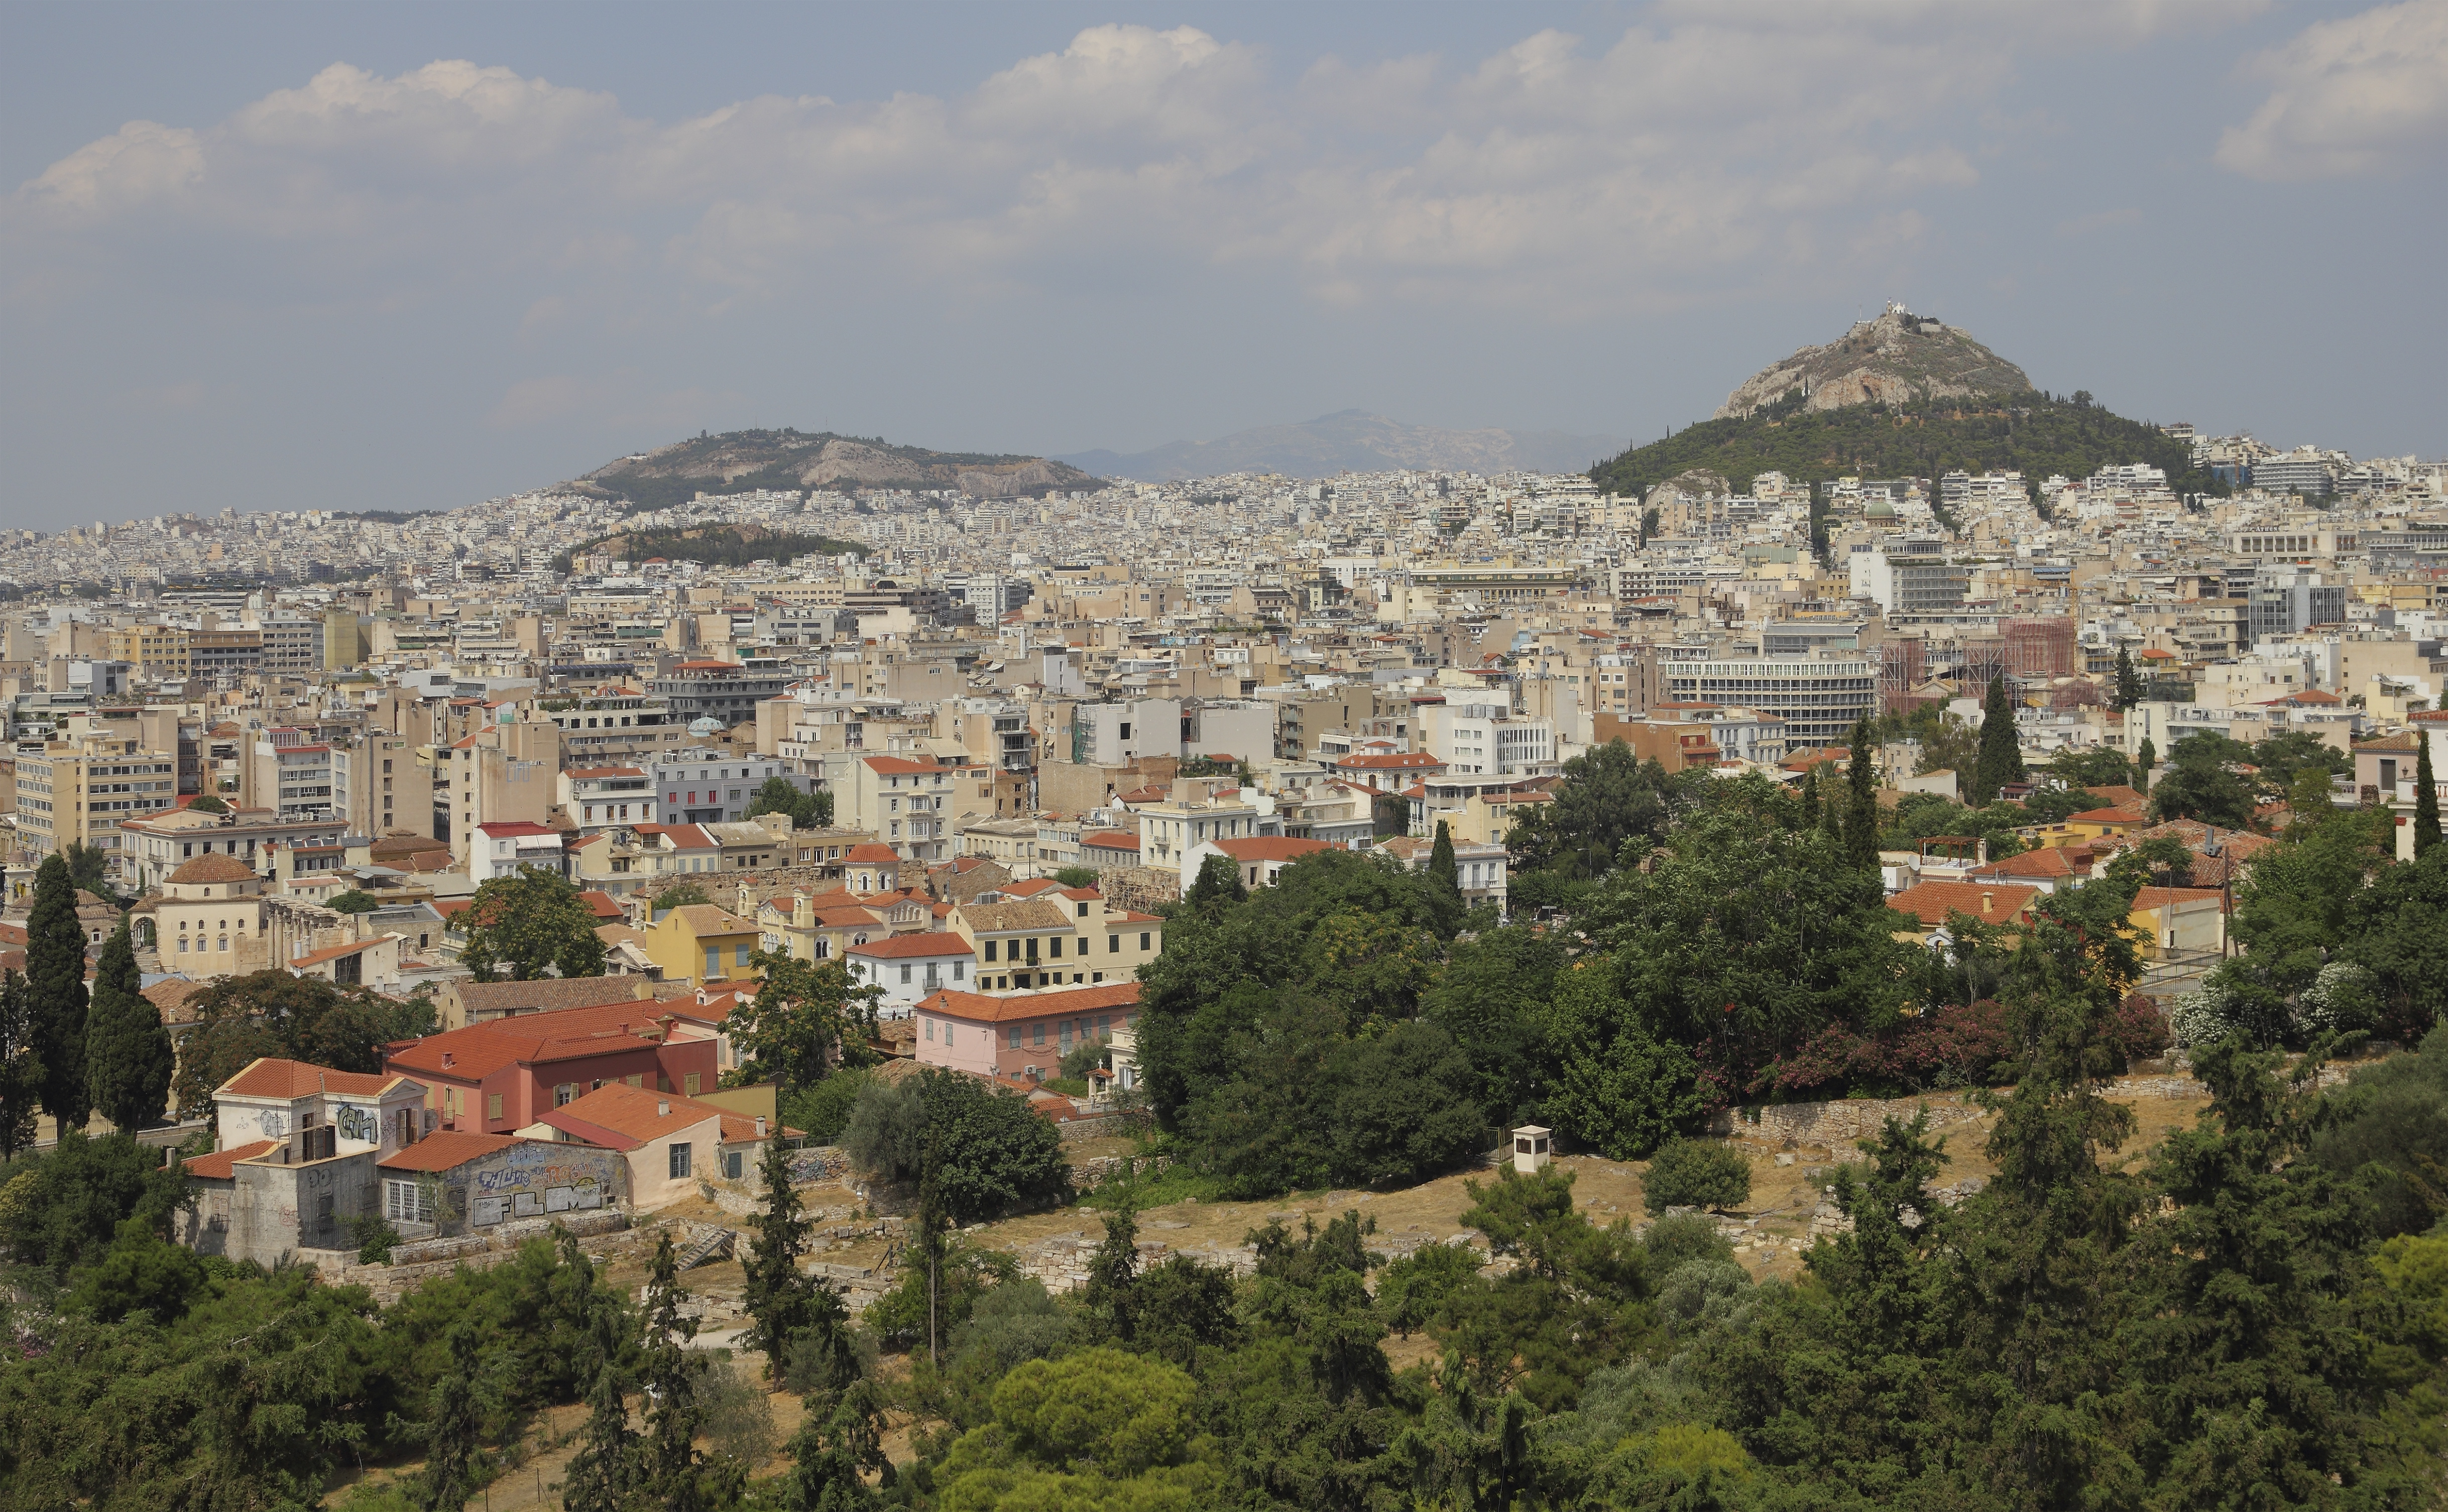 Attica 06-13 Athens 14 View from Acropolis Hill